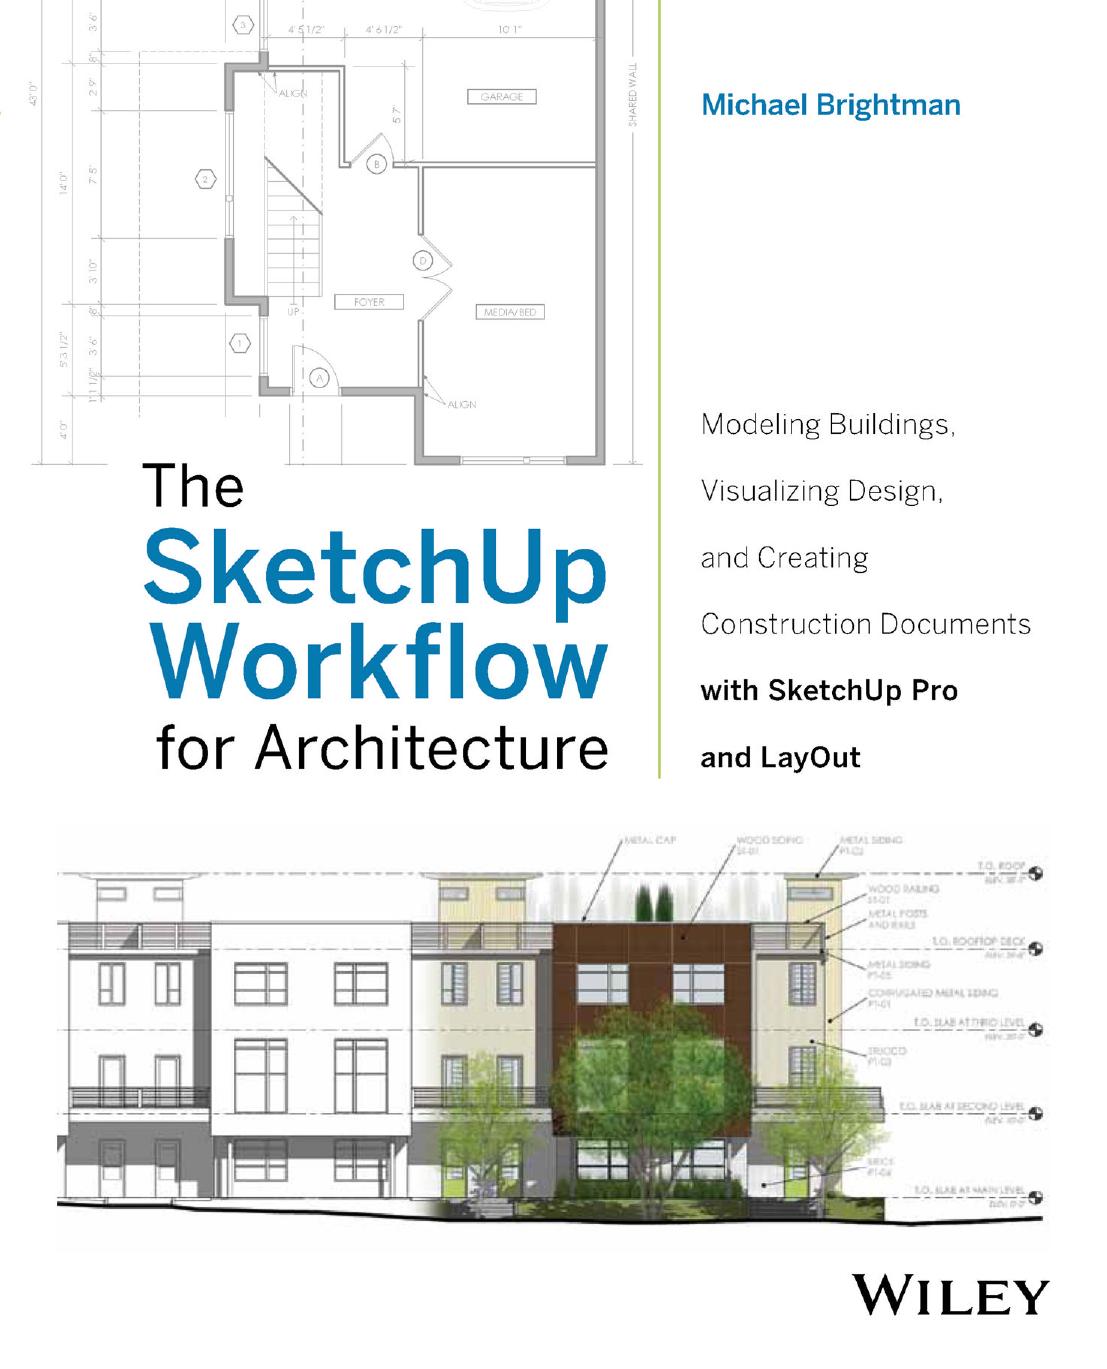 The SketchUp Workflow for Architecture by Michael Brightman